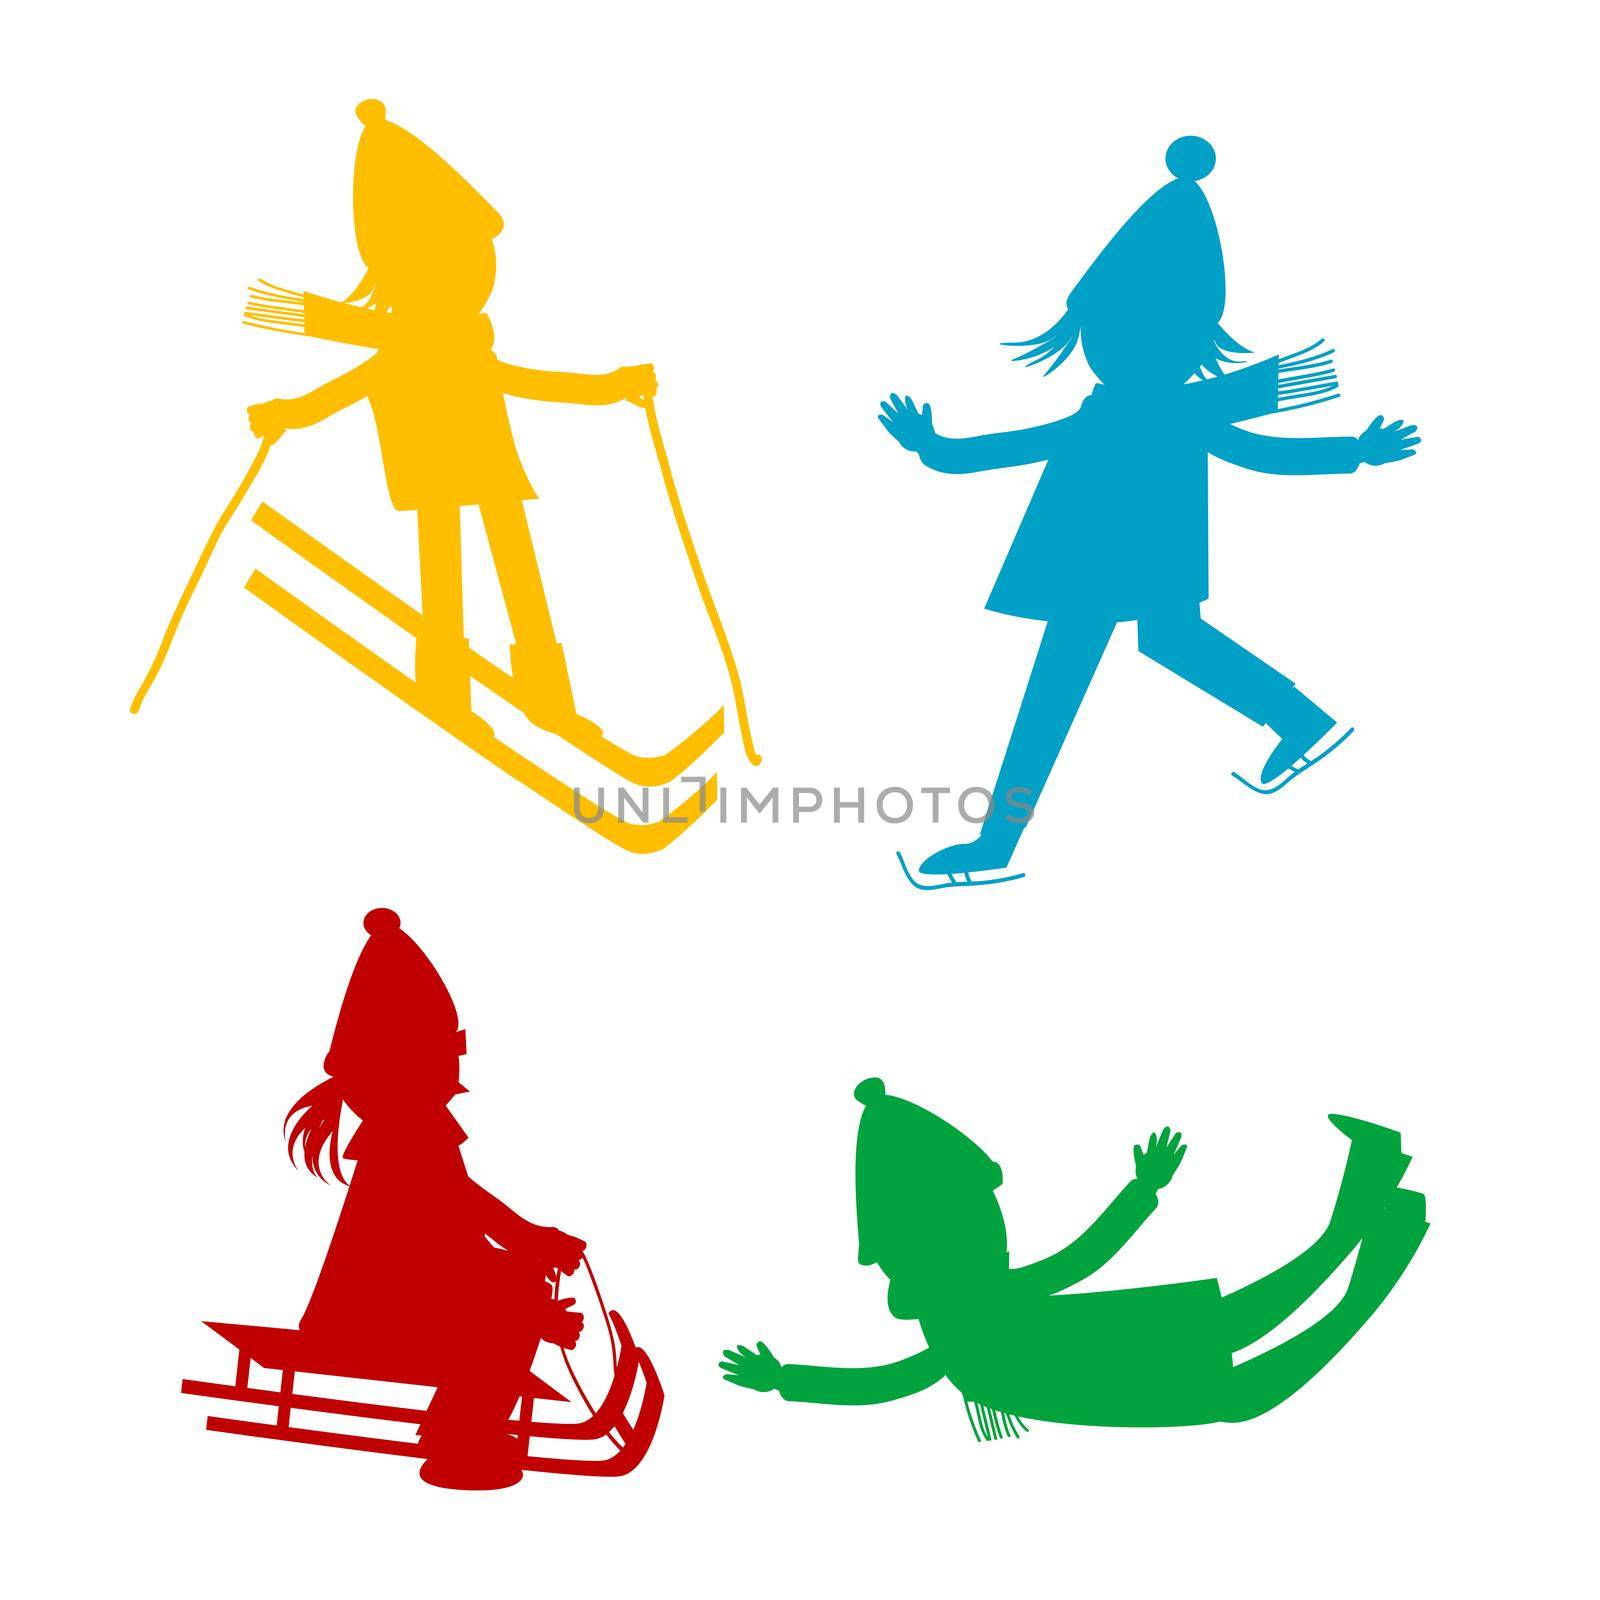 Cartoon kids silhouettes playing in the winter